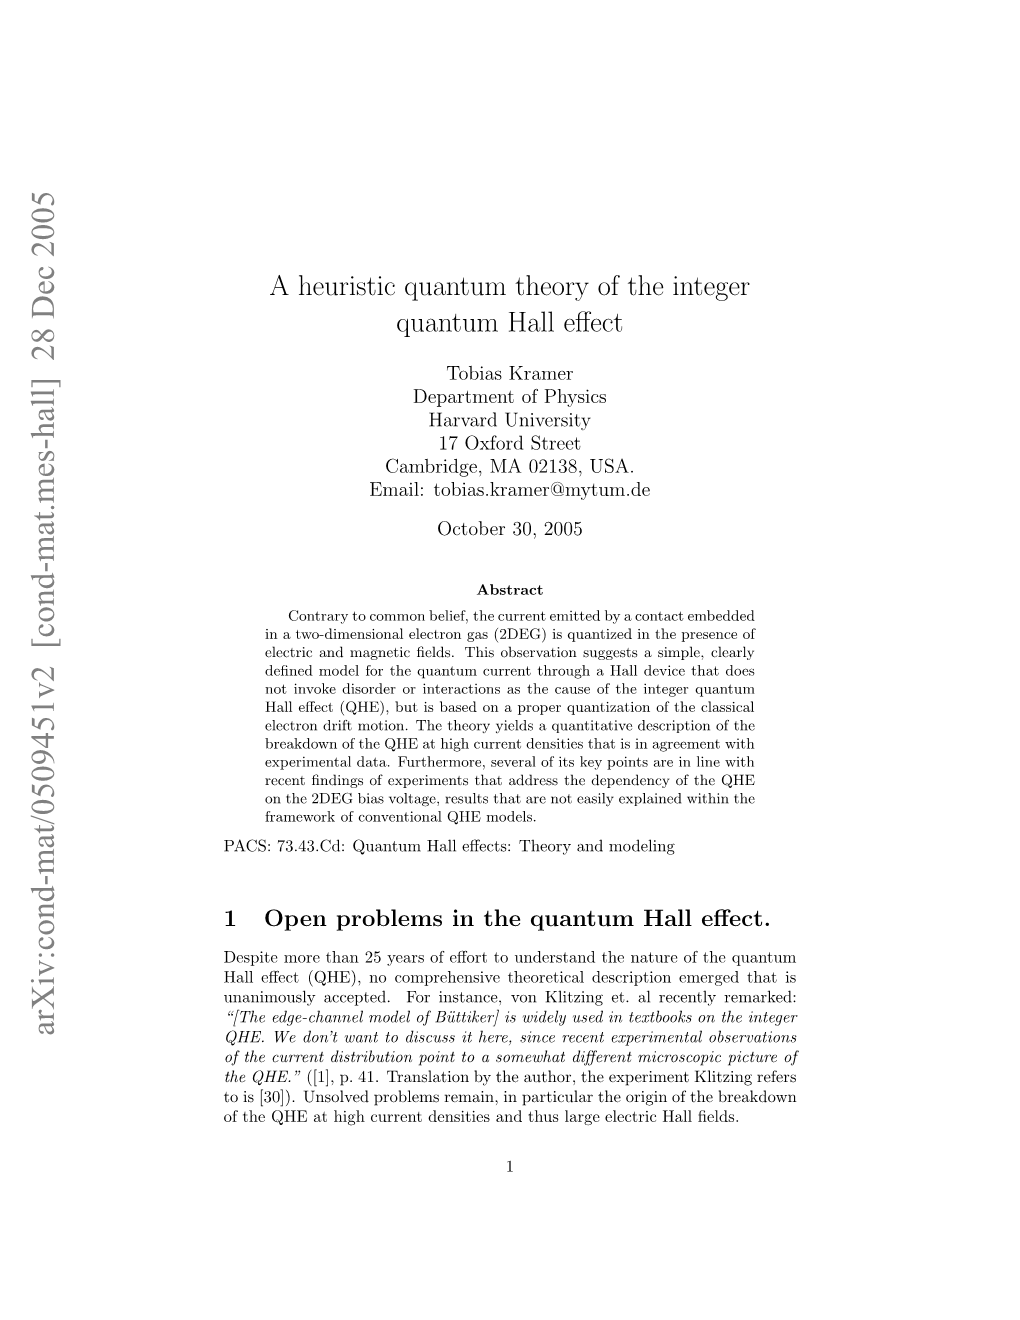 A Heuristic Quantum Theory of the Integer Quantum Hall Effect